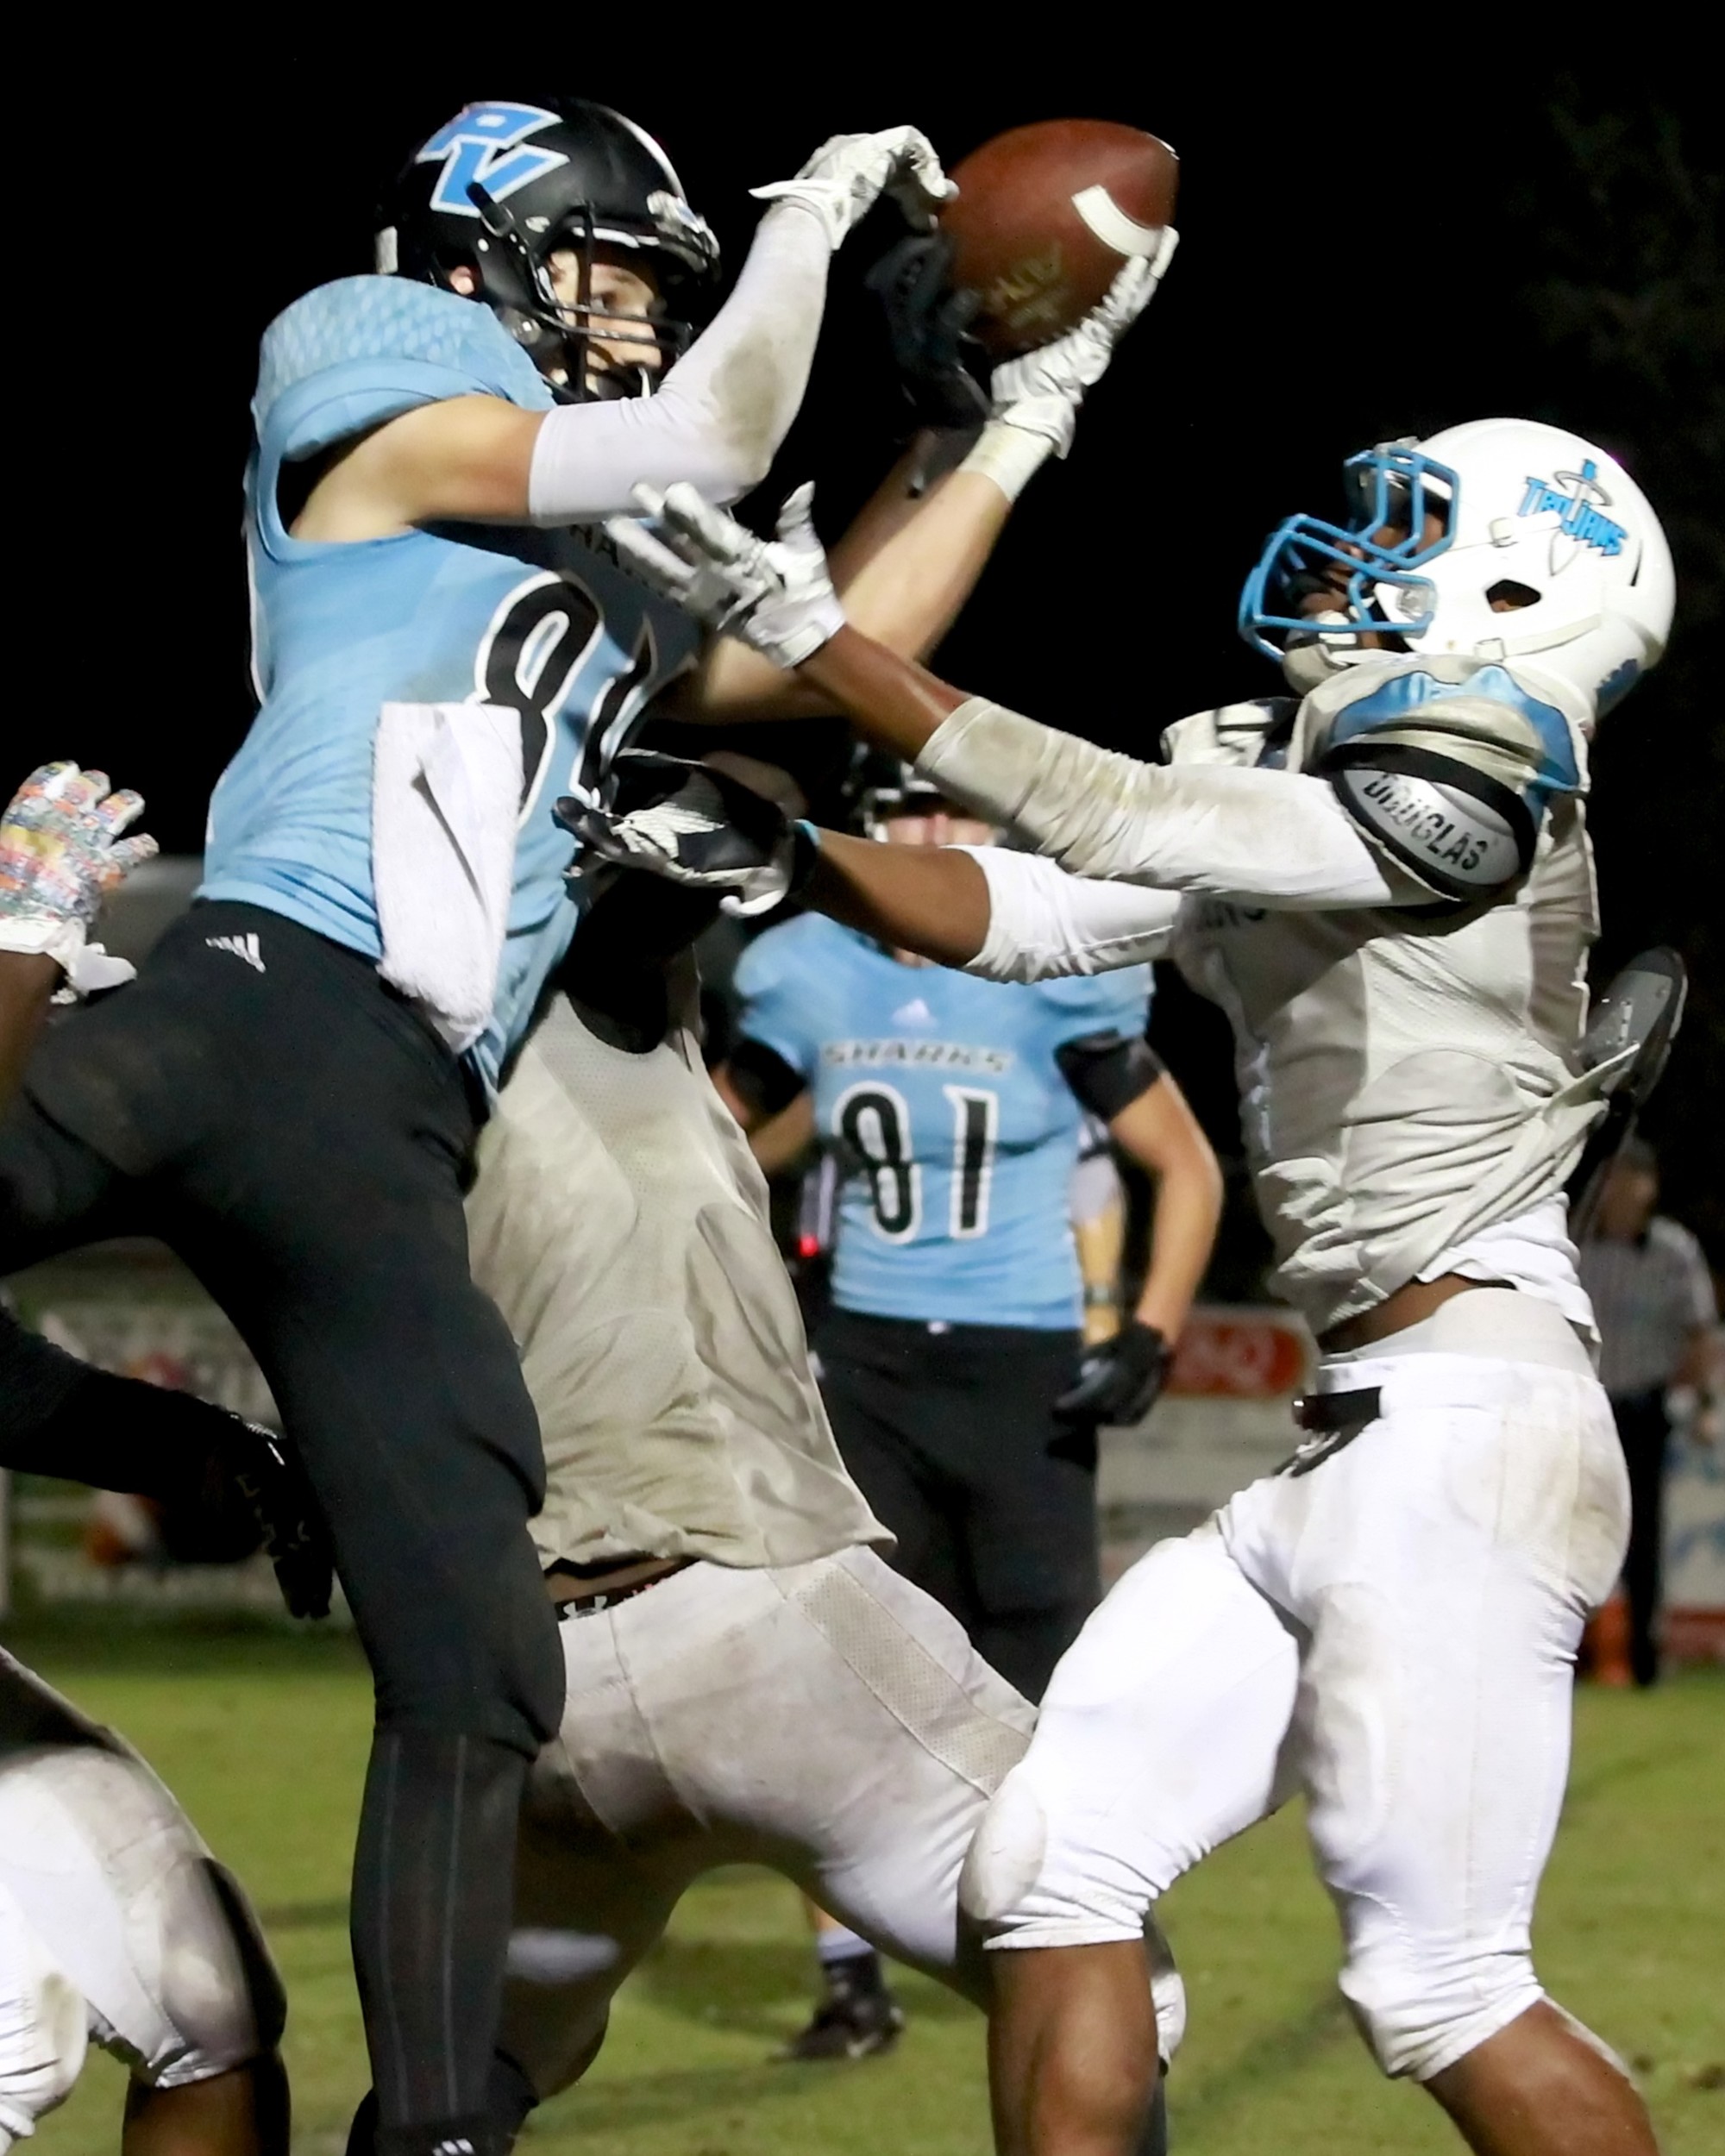 Jarret Stepp #84 goes high to catch a pass for the Sharks.